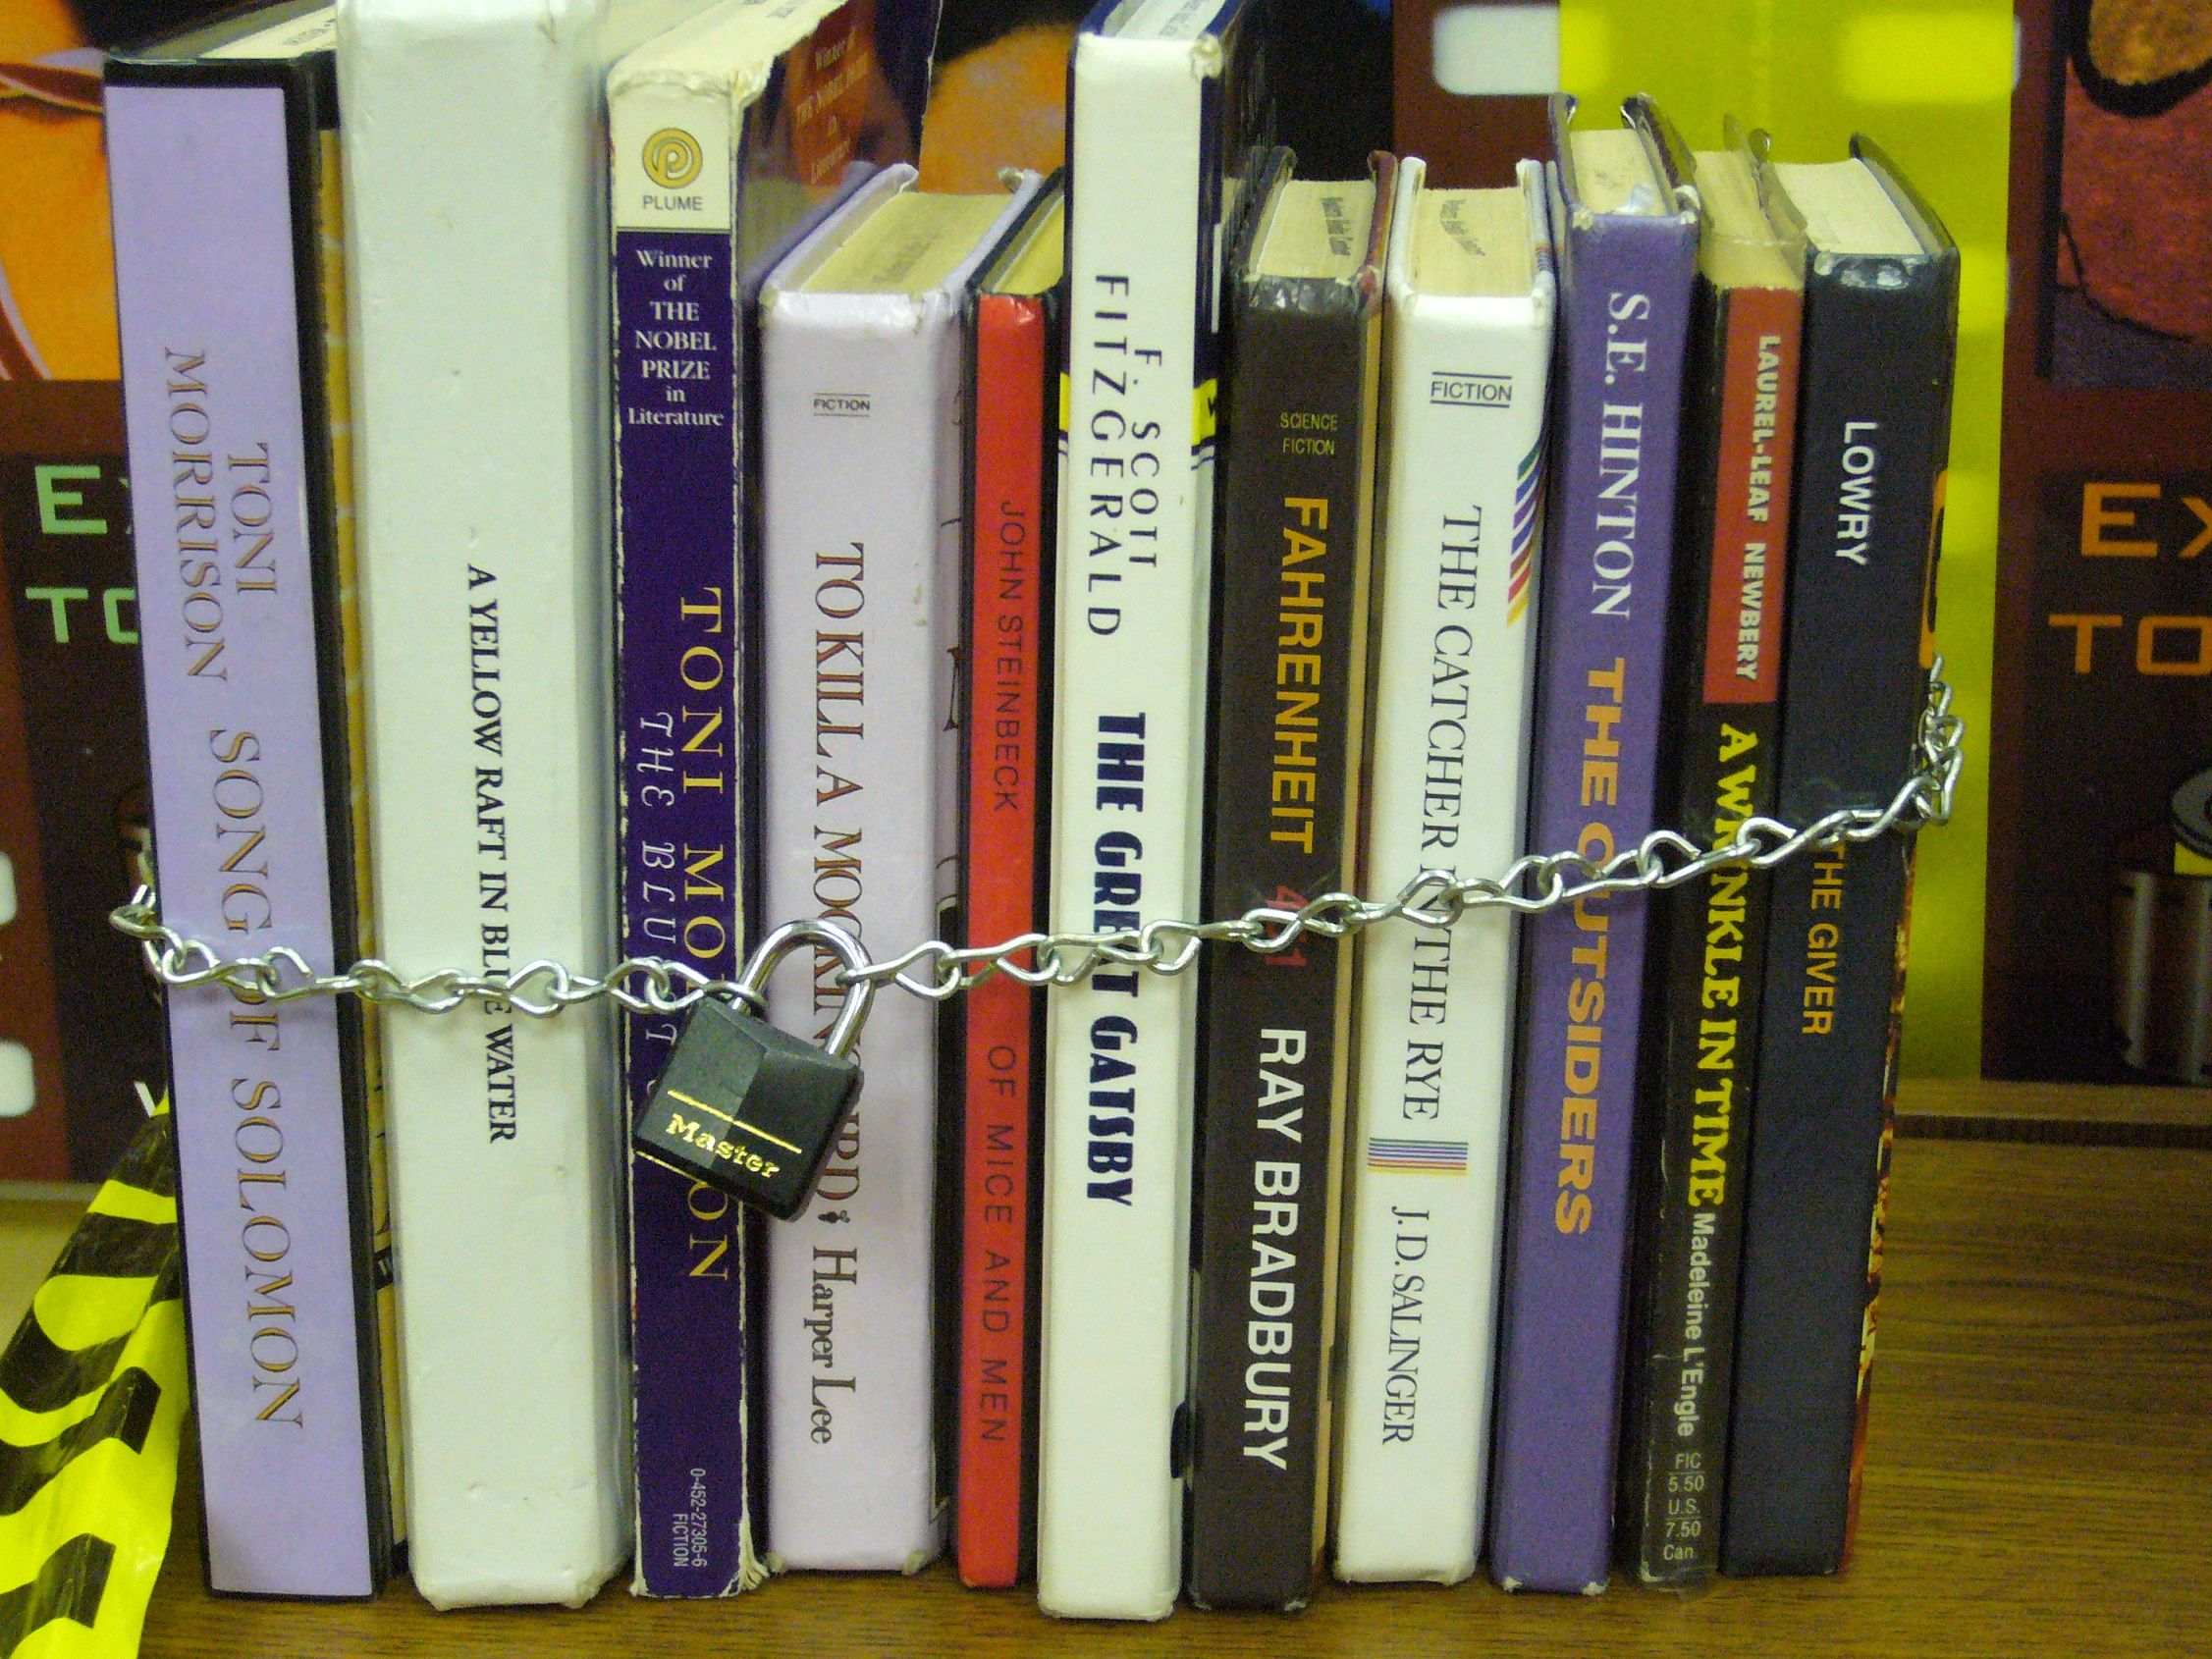 Group of books with a locked chain around them, books included are classics like "The Great Gatsby" and "The Catcher in the Rye."